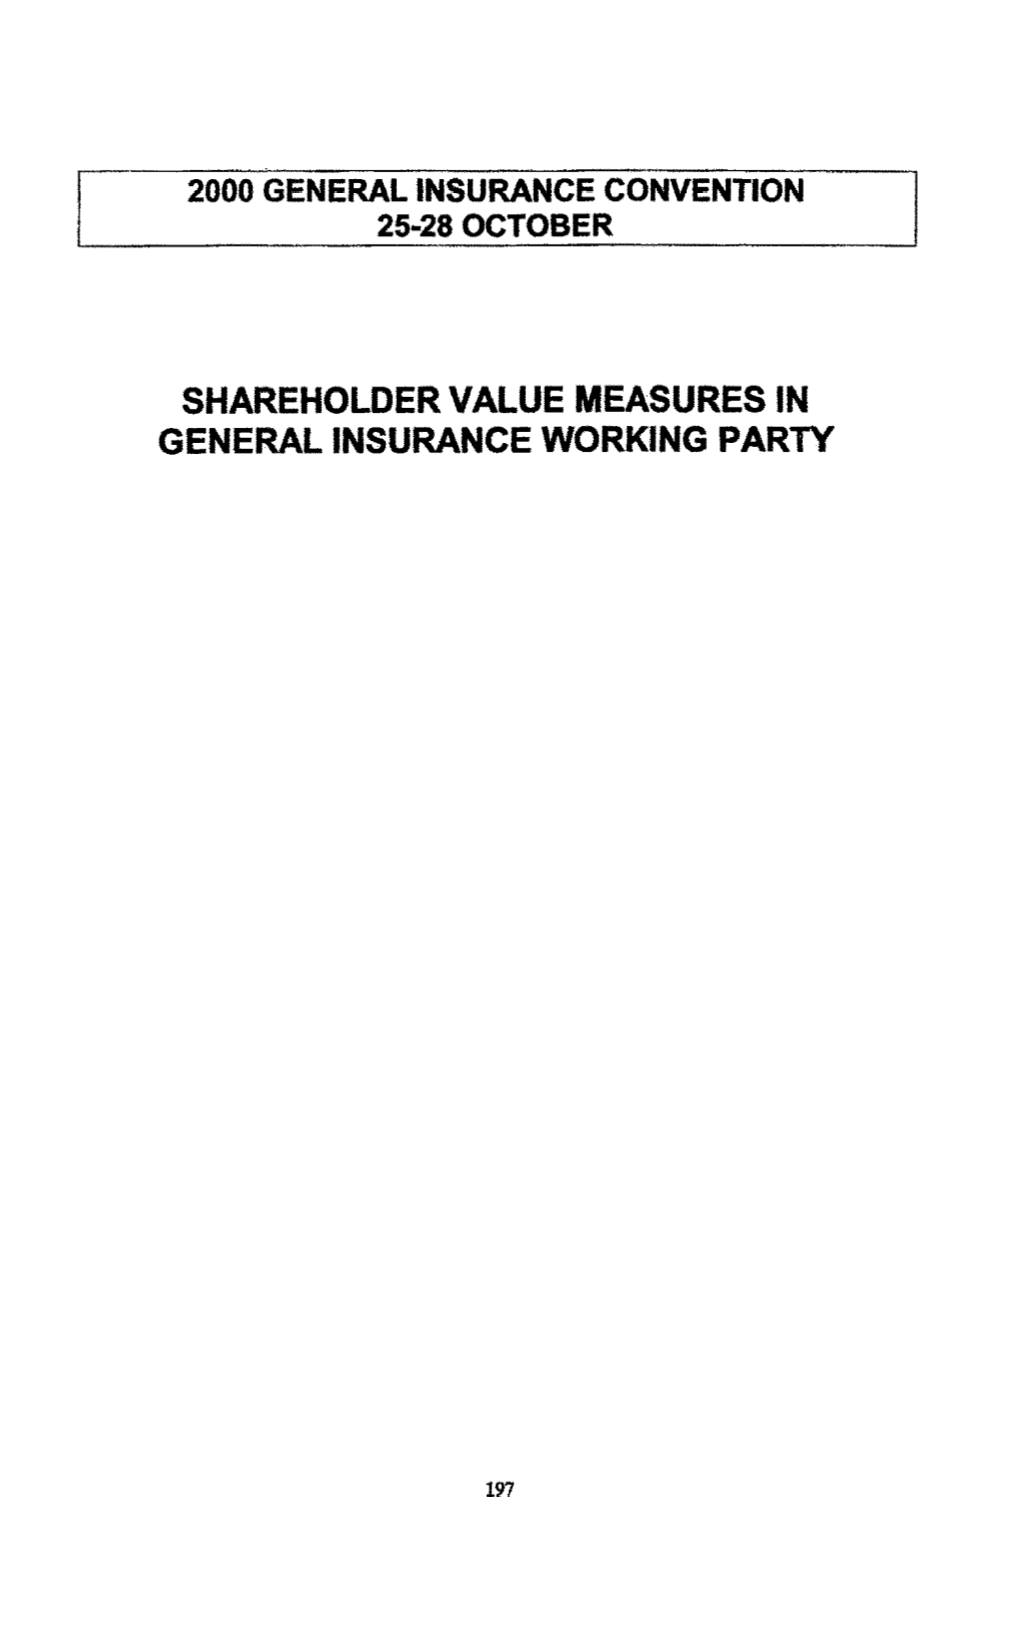 Shareholder Value Measures in General Insurance Working Party